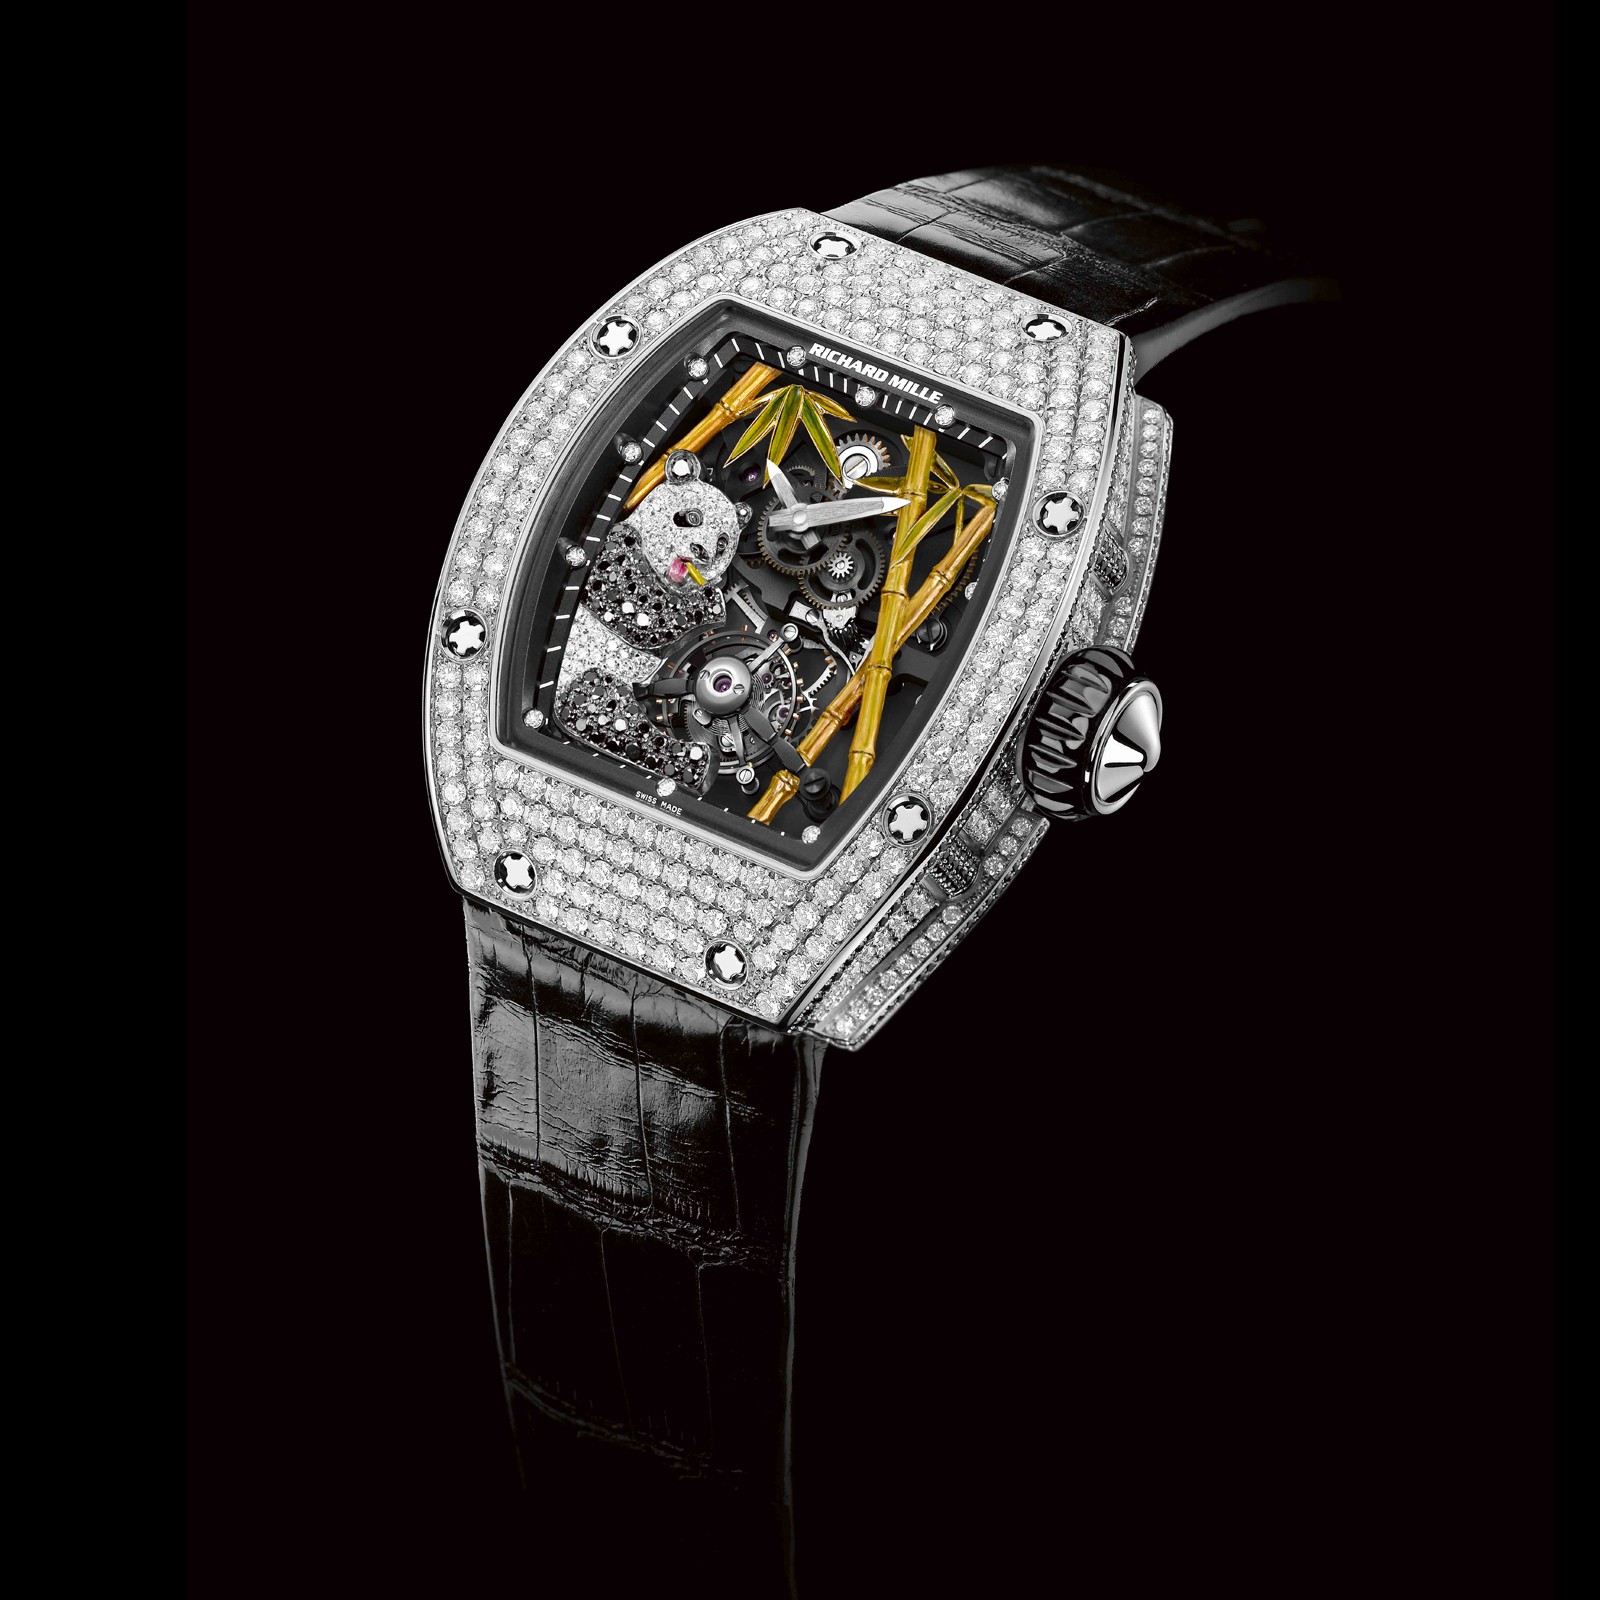 Richard Mille RM 26-01 Replica Watches